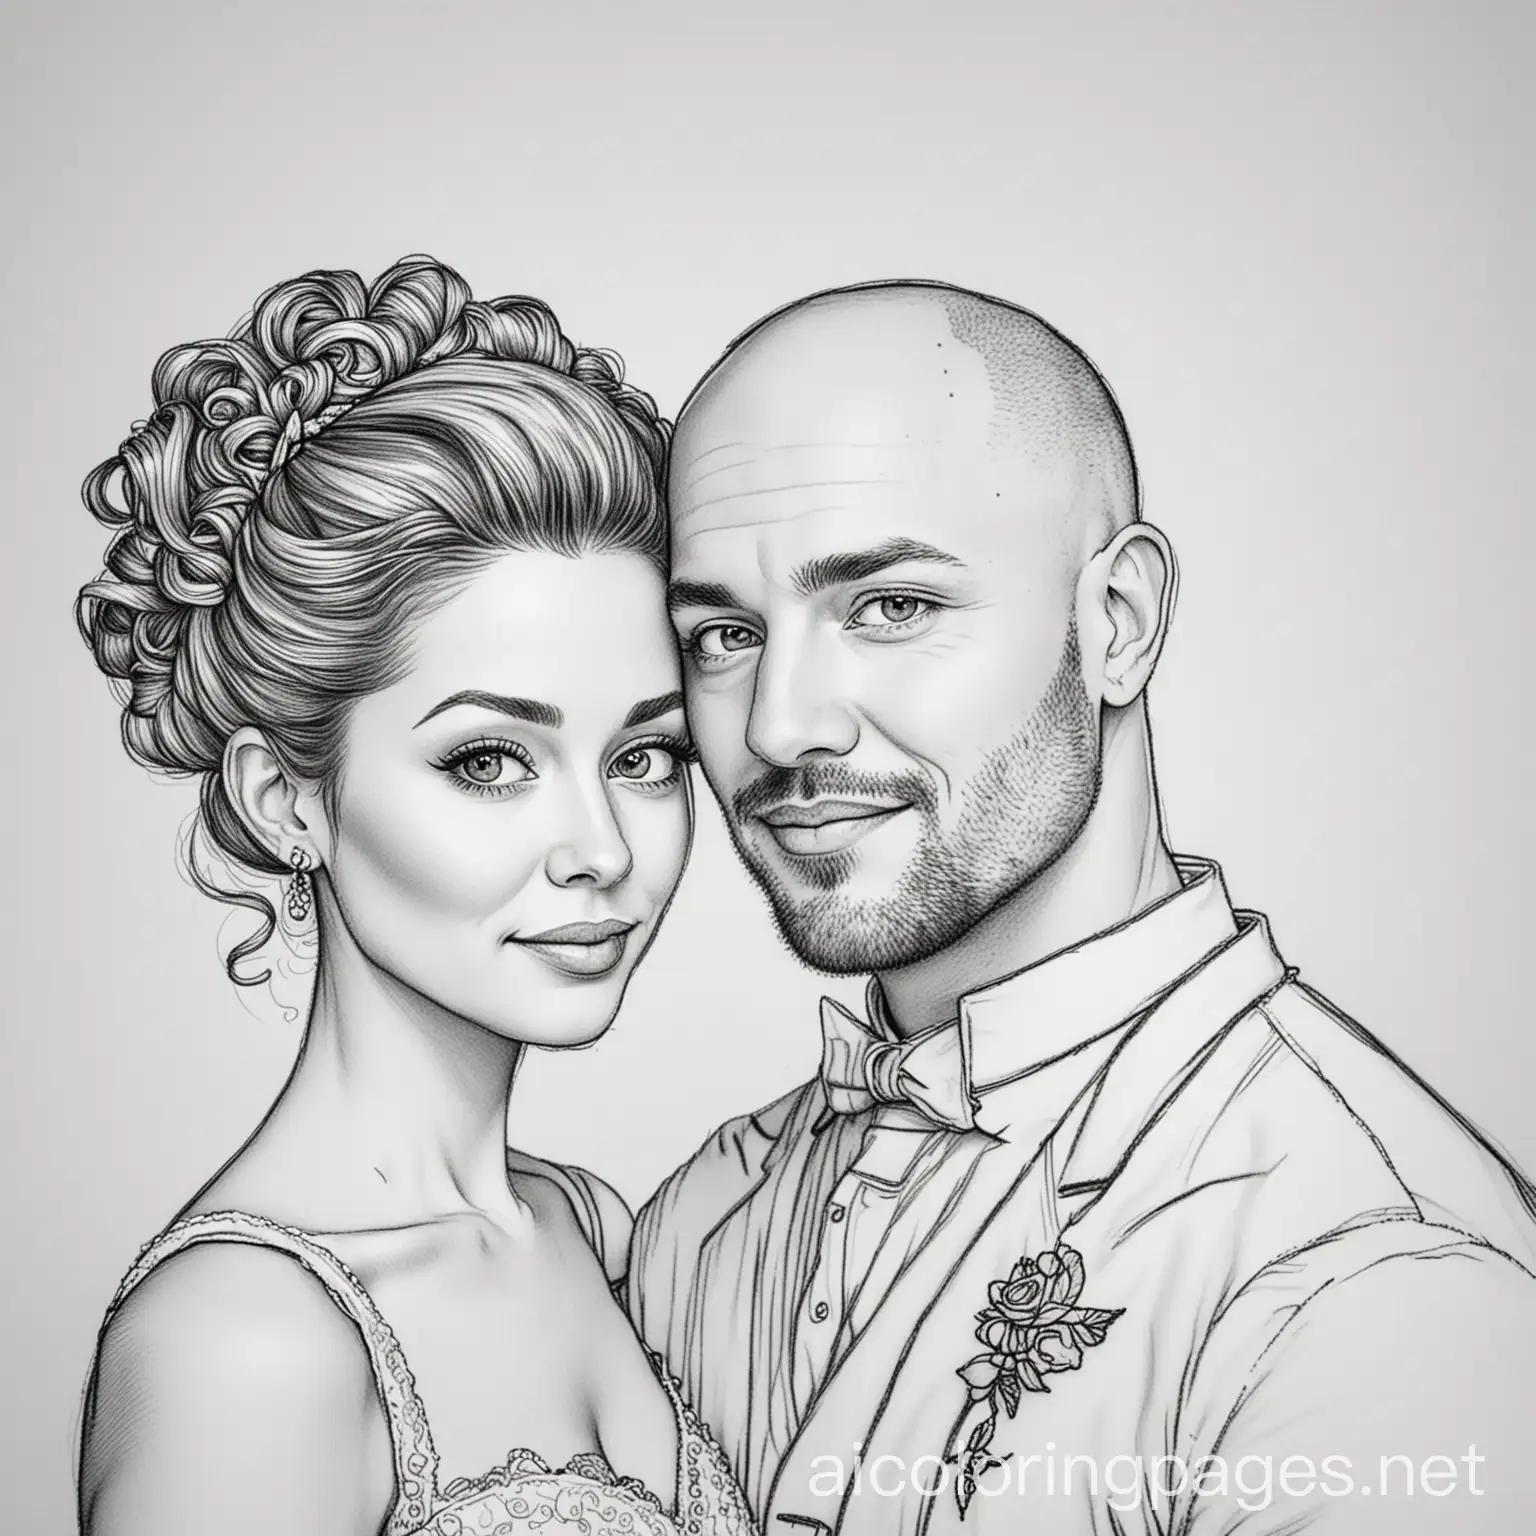  30 yr old Bride with curly hair up do and 30 Yr old Groom with bald head, Coloring Page, black and white, line art, white background, Simplicity, Ample White Space. The background of the coloring page is plain white to make it easy for young children to color within the lines. The outlines of all the subjects are easy to distinguish, making it simple for kids to color without too much difficulty